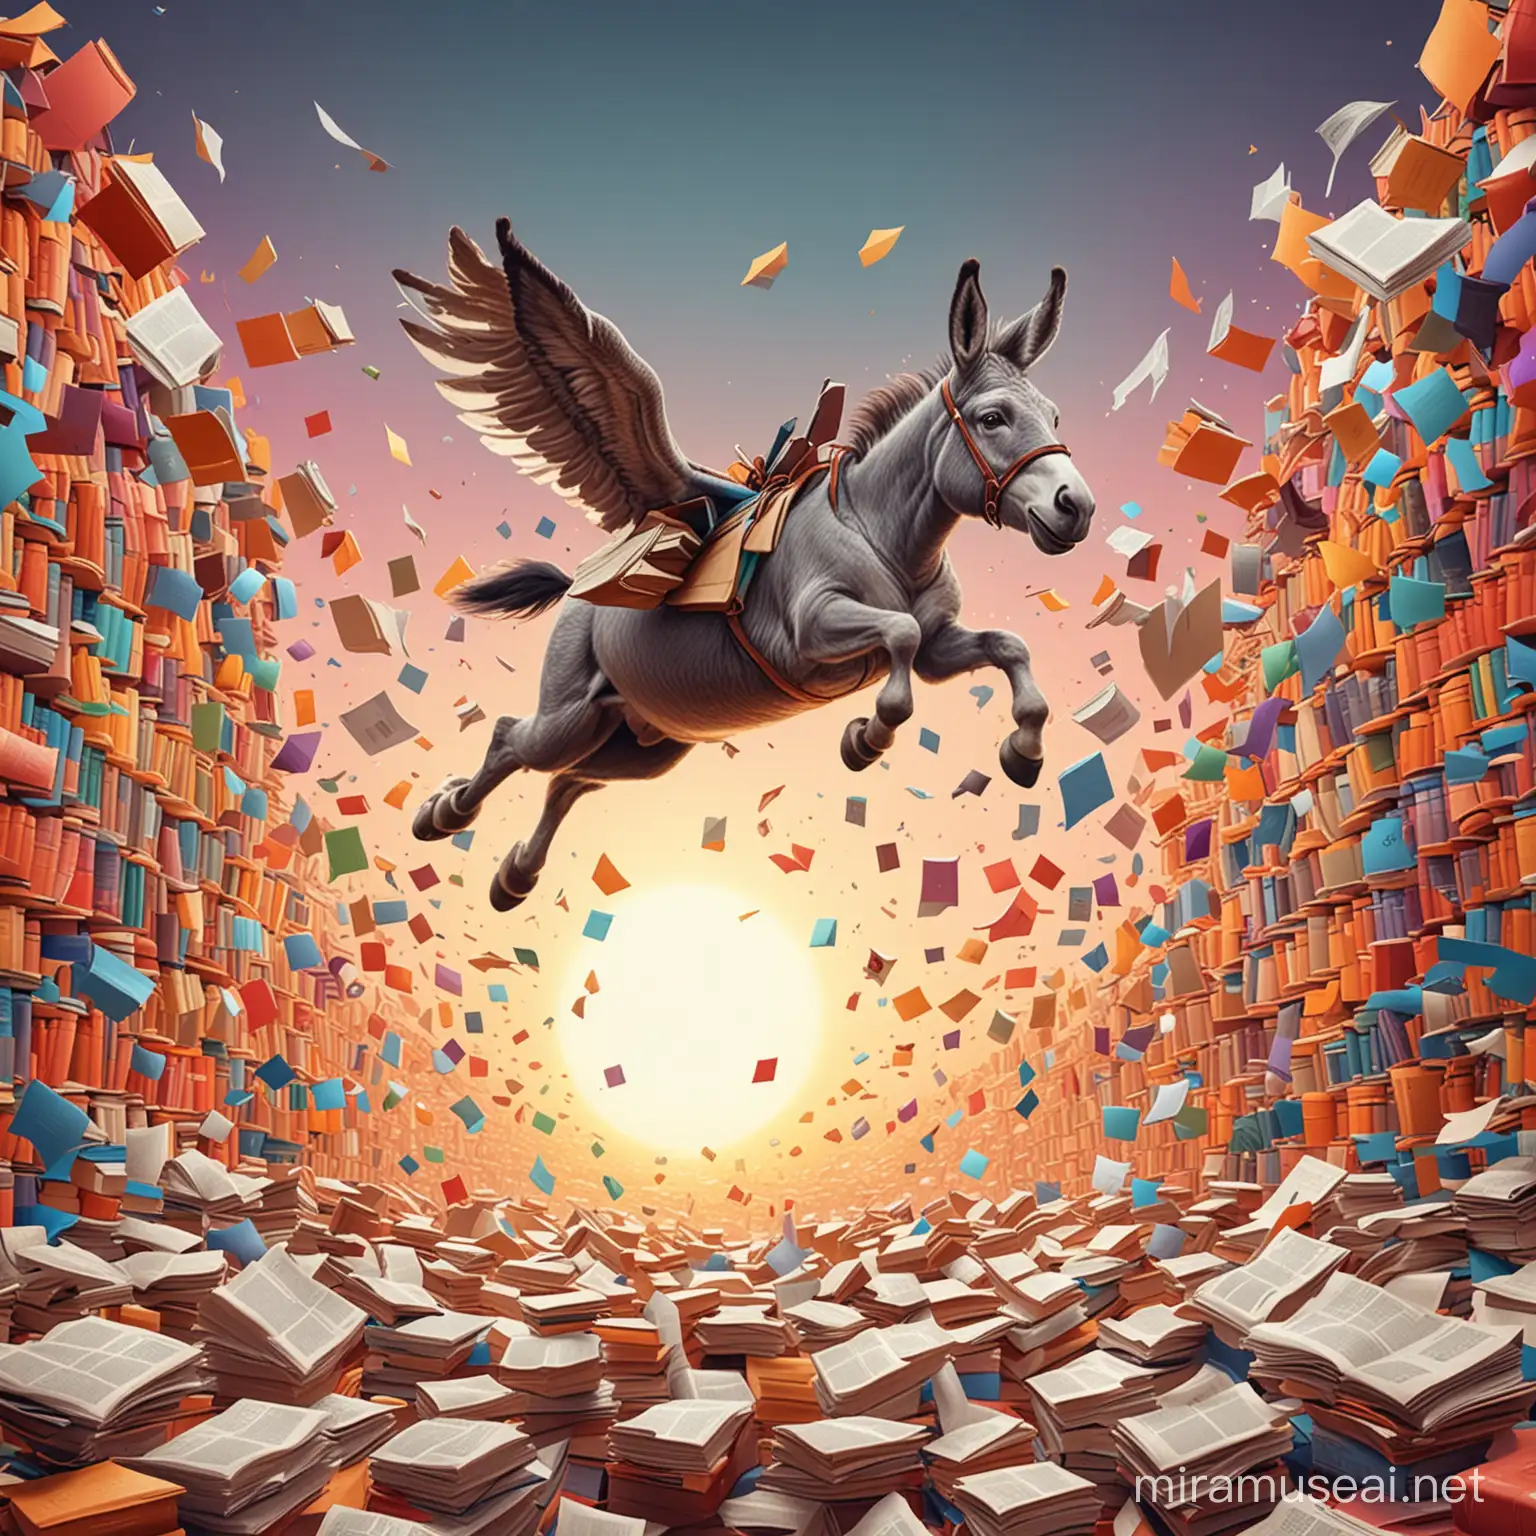 Flying Donkey Soaring over a Colorful Realm of Knowledge